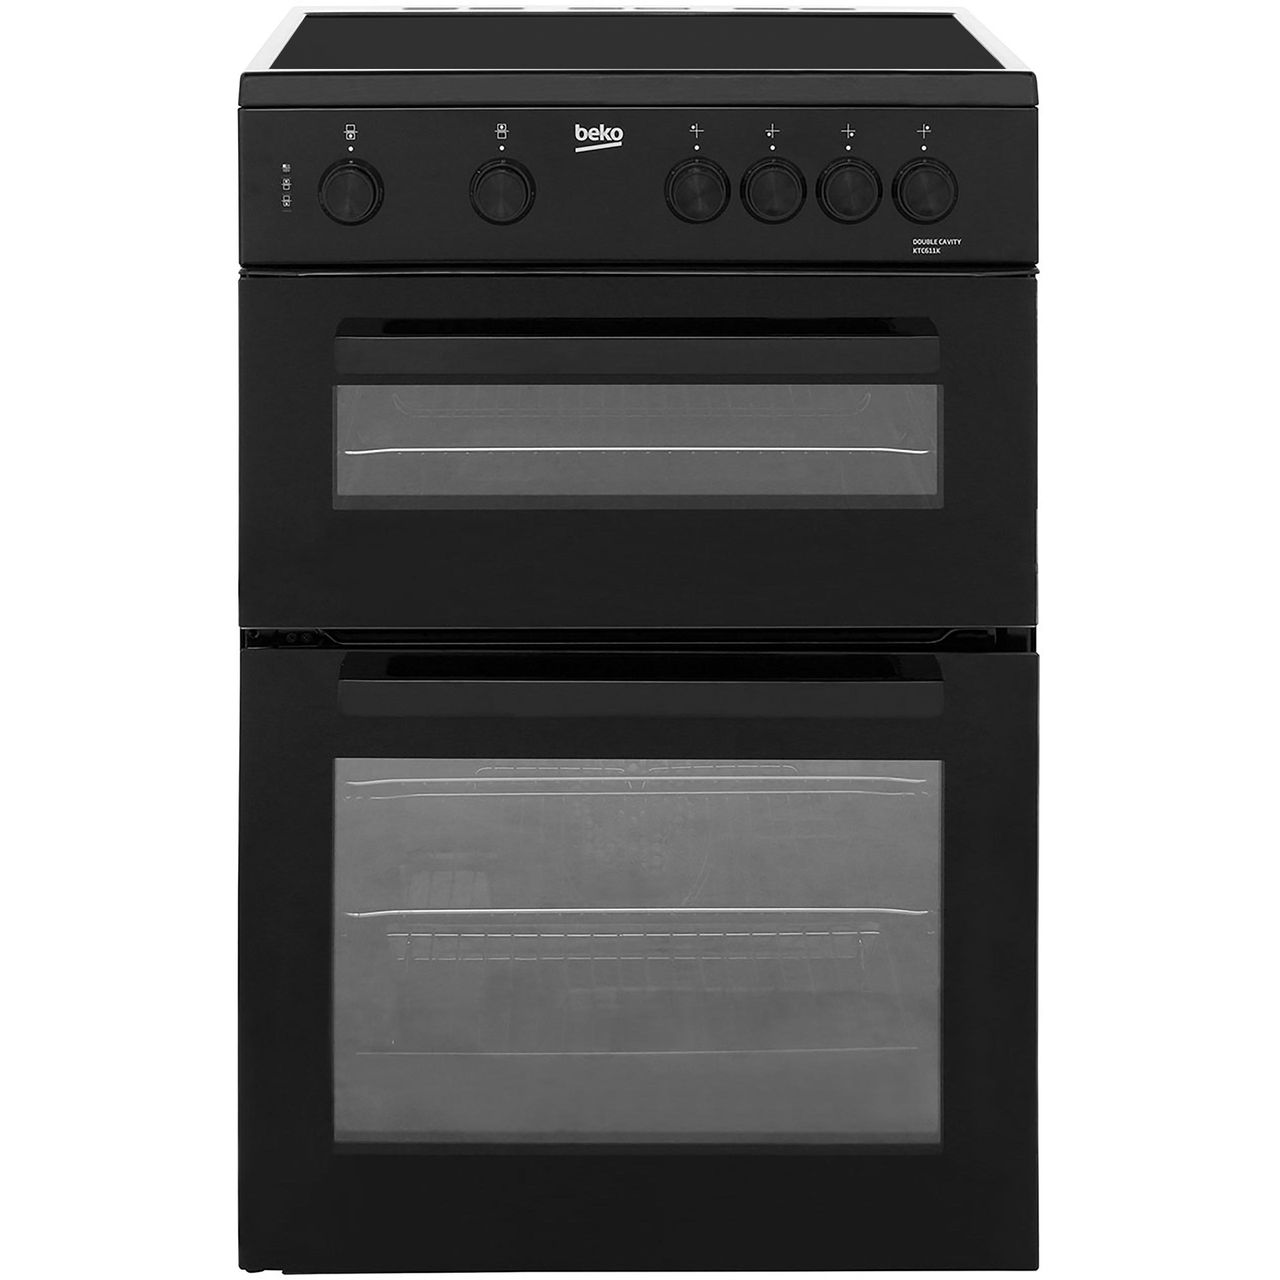 Beko 60cm Electric Cooker with Ceramic Hob - Black - A Rated